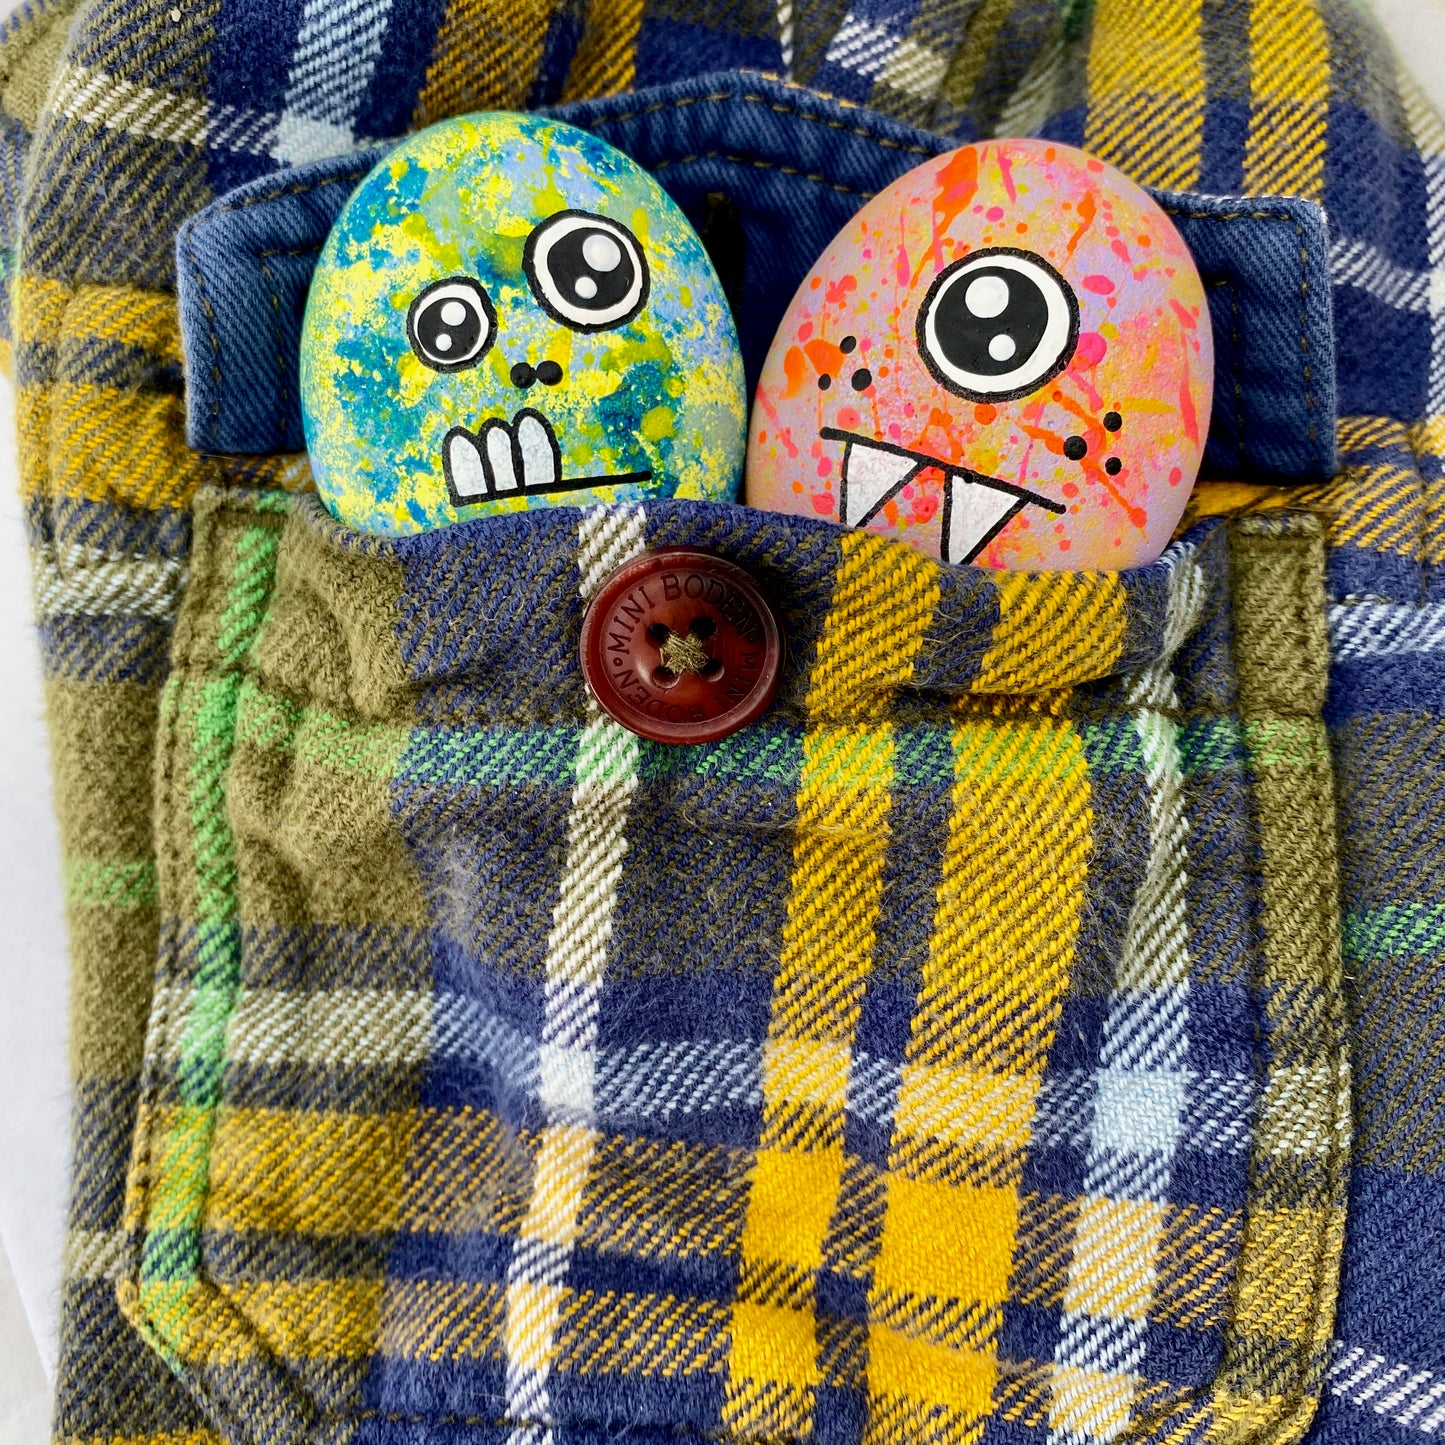 2 hand painted monster pebbles, one with 2 eyes called Flomp, and one with 1 eye called Blerp poking out of a pocket